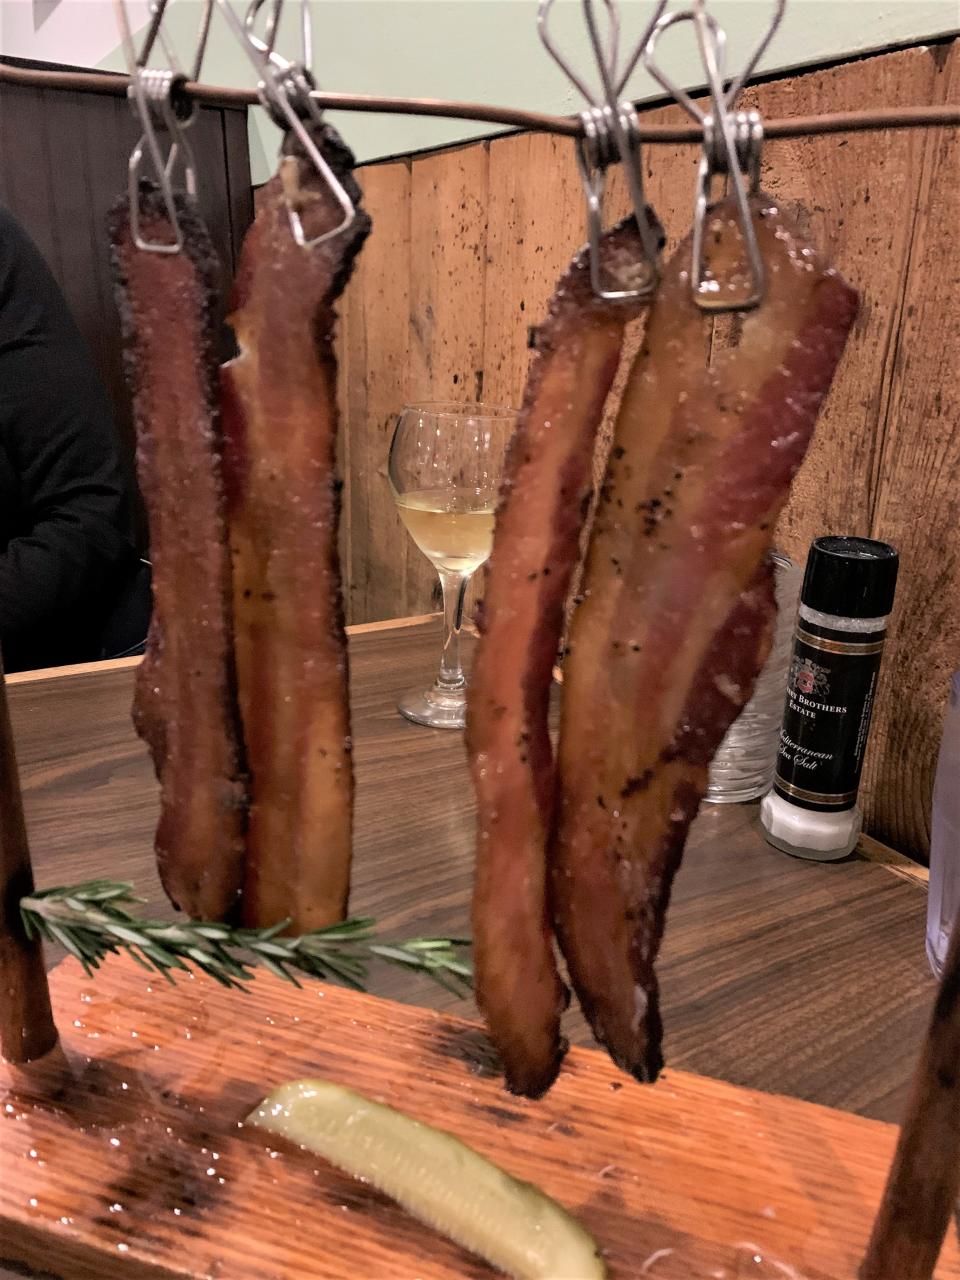 The Sweet Swine at 12A Buoy is thick-cut black pepper and maple glazed bacon strips dangling from a clothesline by metal clips.